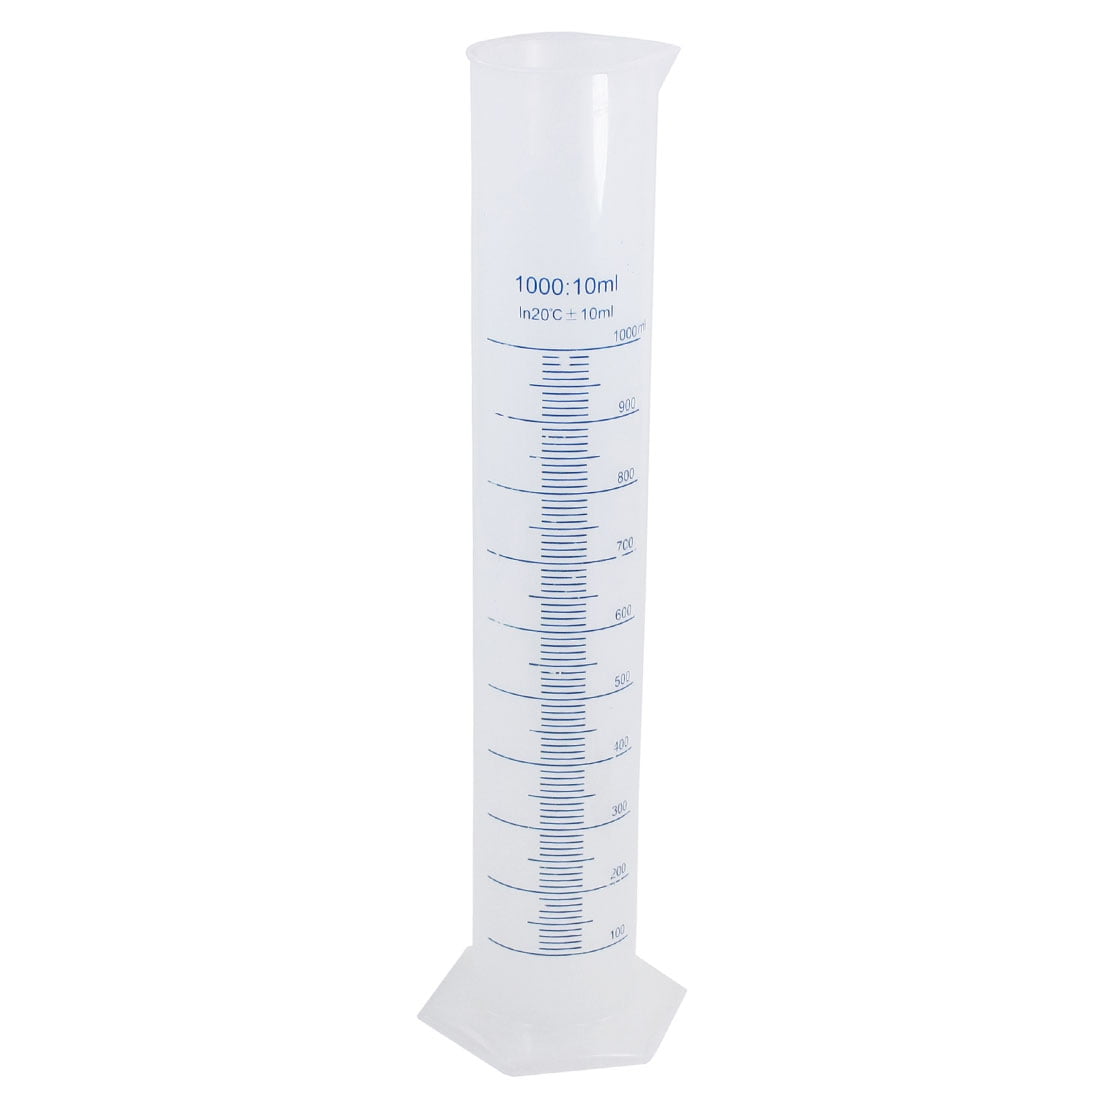 Sci-Supply 3-Pack Plastic 1000 mL Graduated Cylinders 